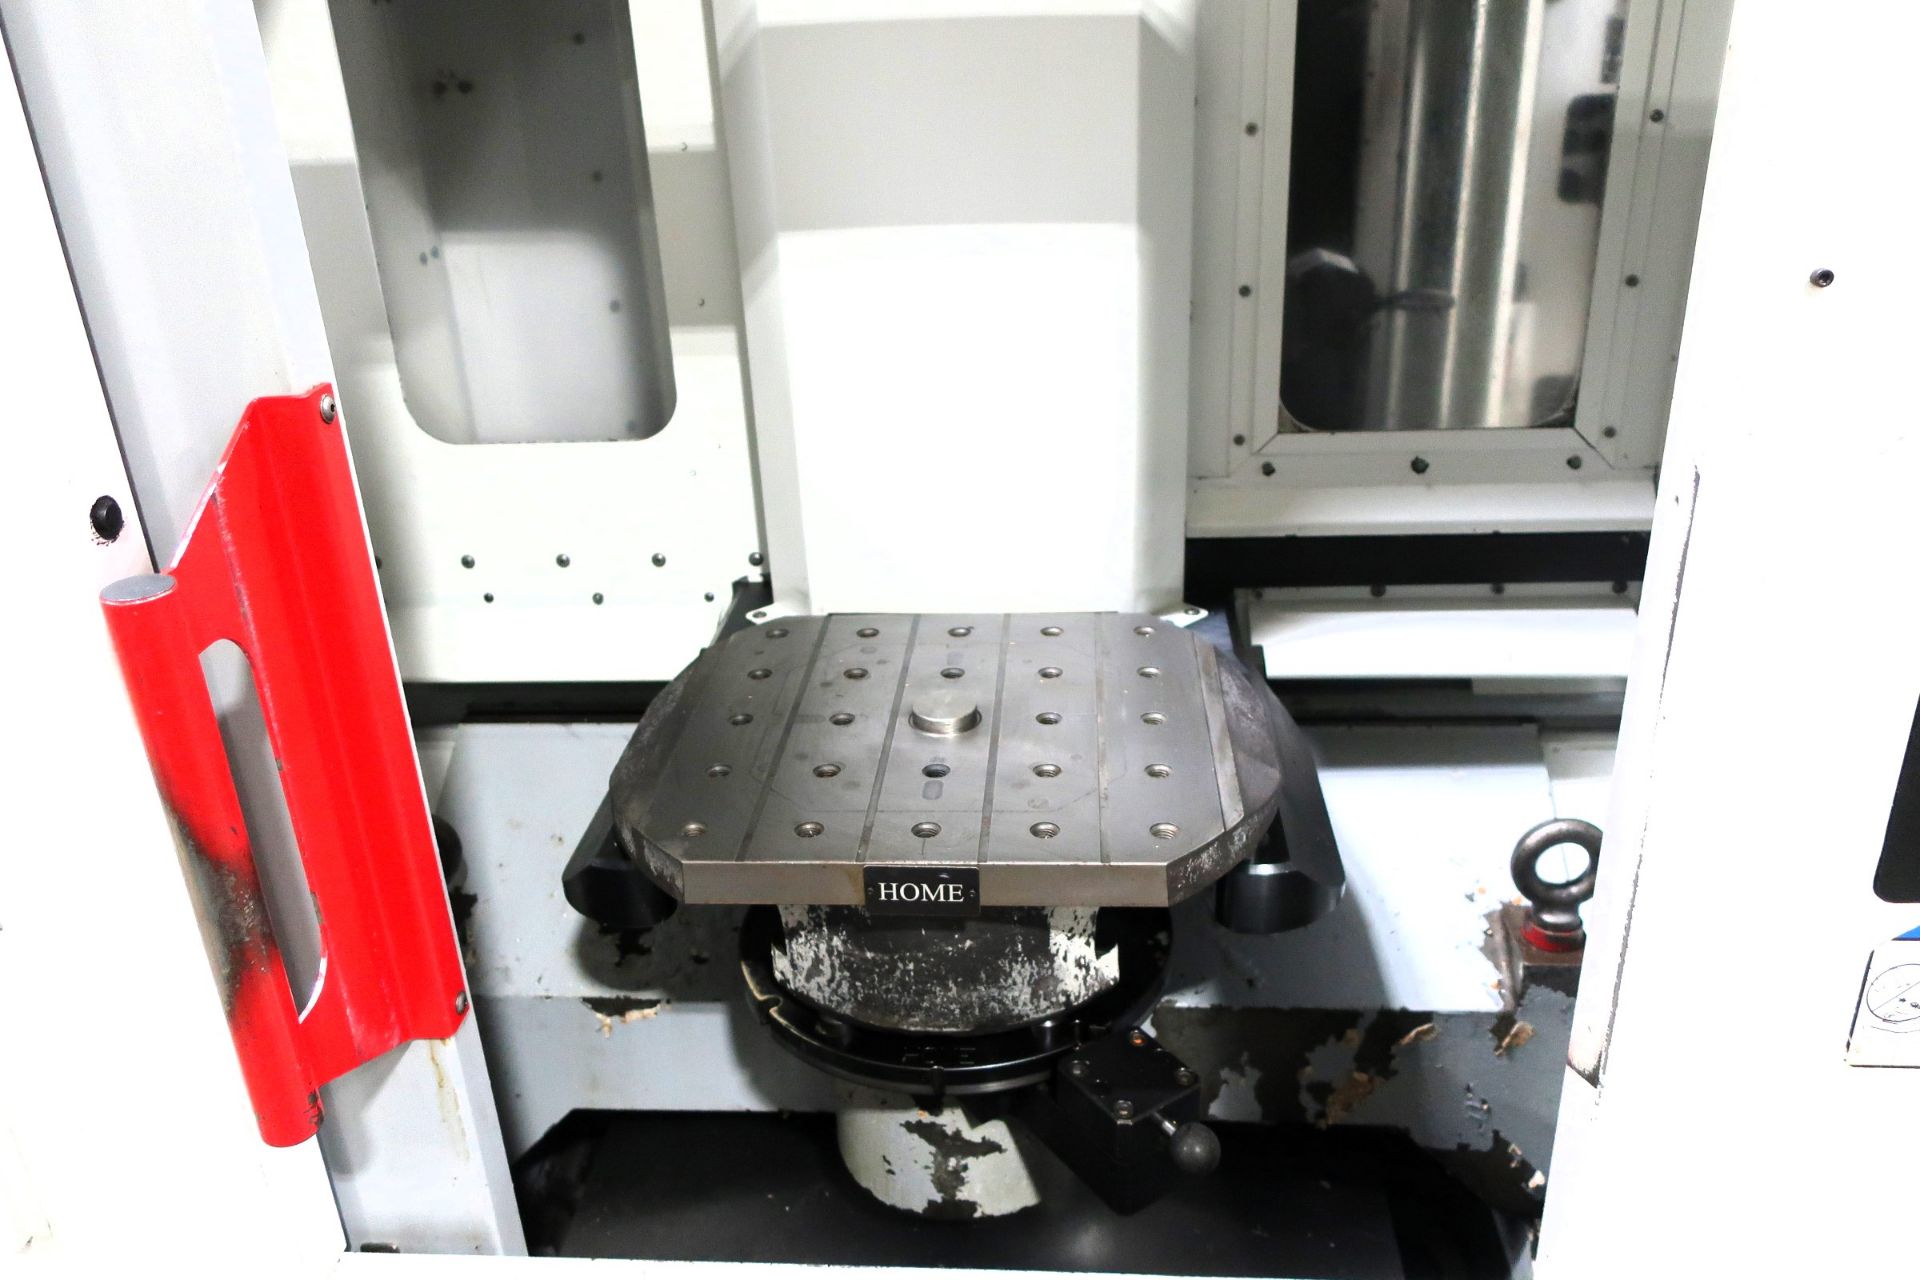 Haas EC-400 4-Axis Precision Horizontal Machining Center w/16" Pallets, S/N 51499, New 2005 - Image 6 of 16